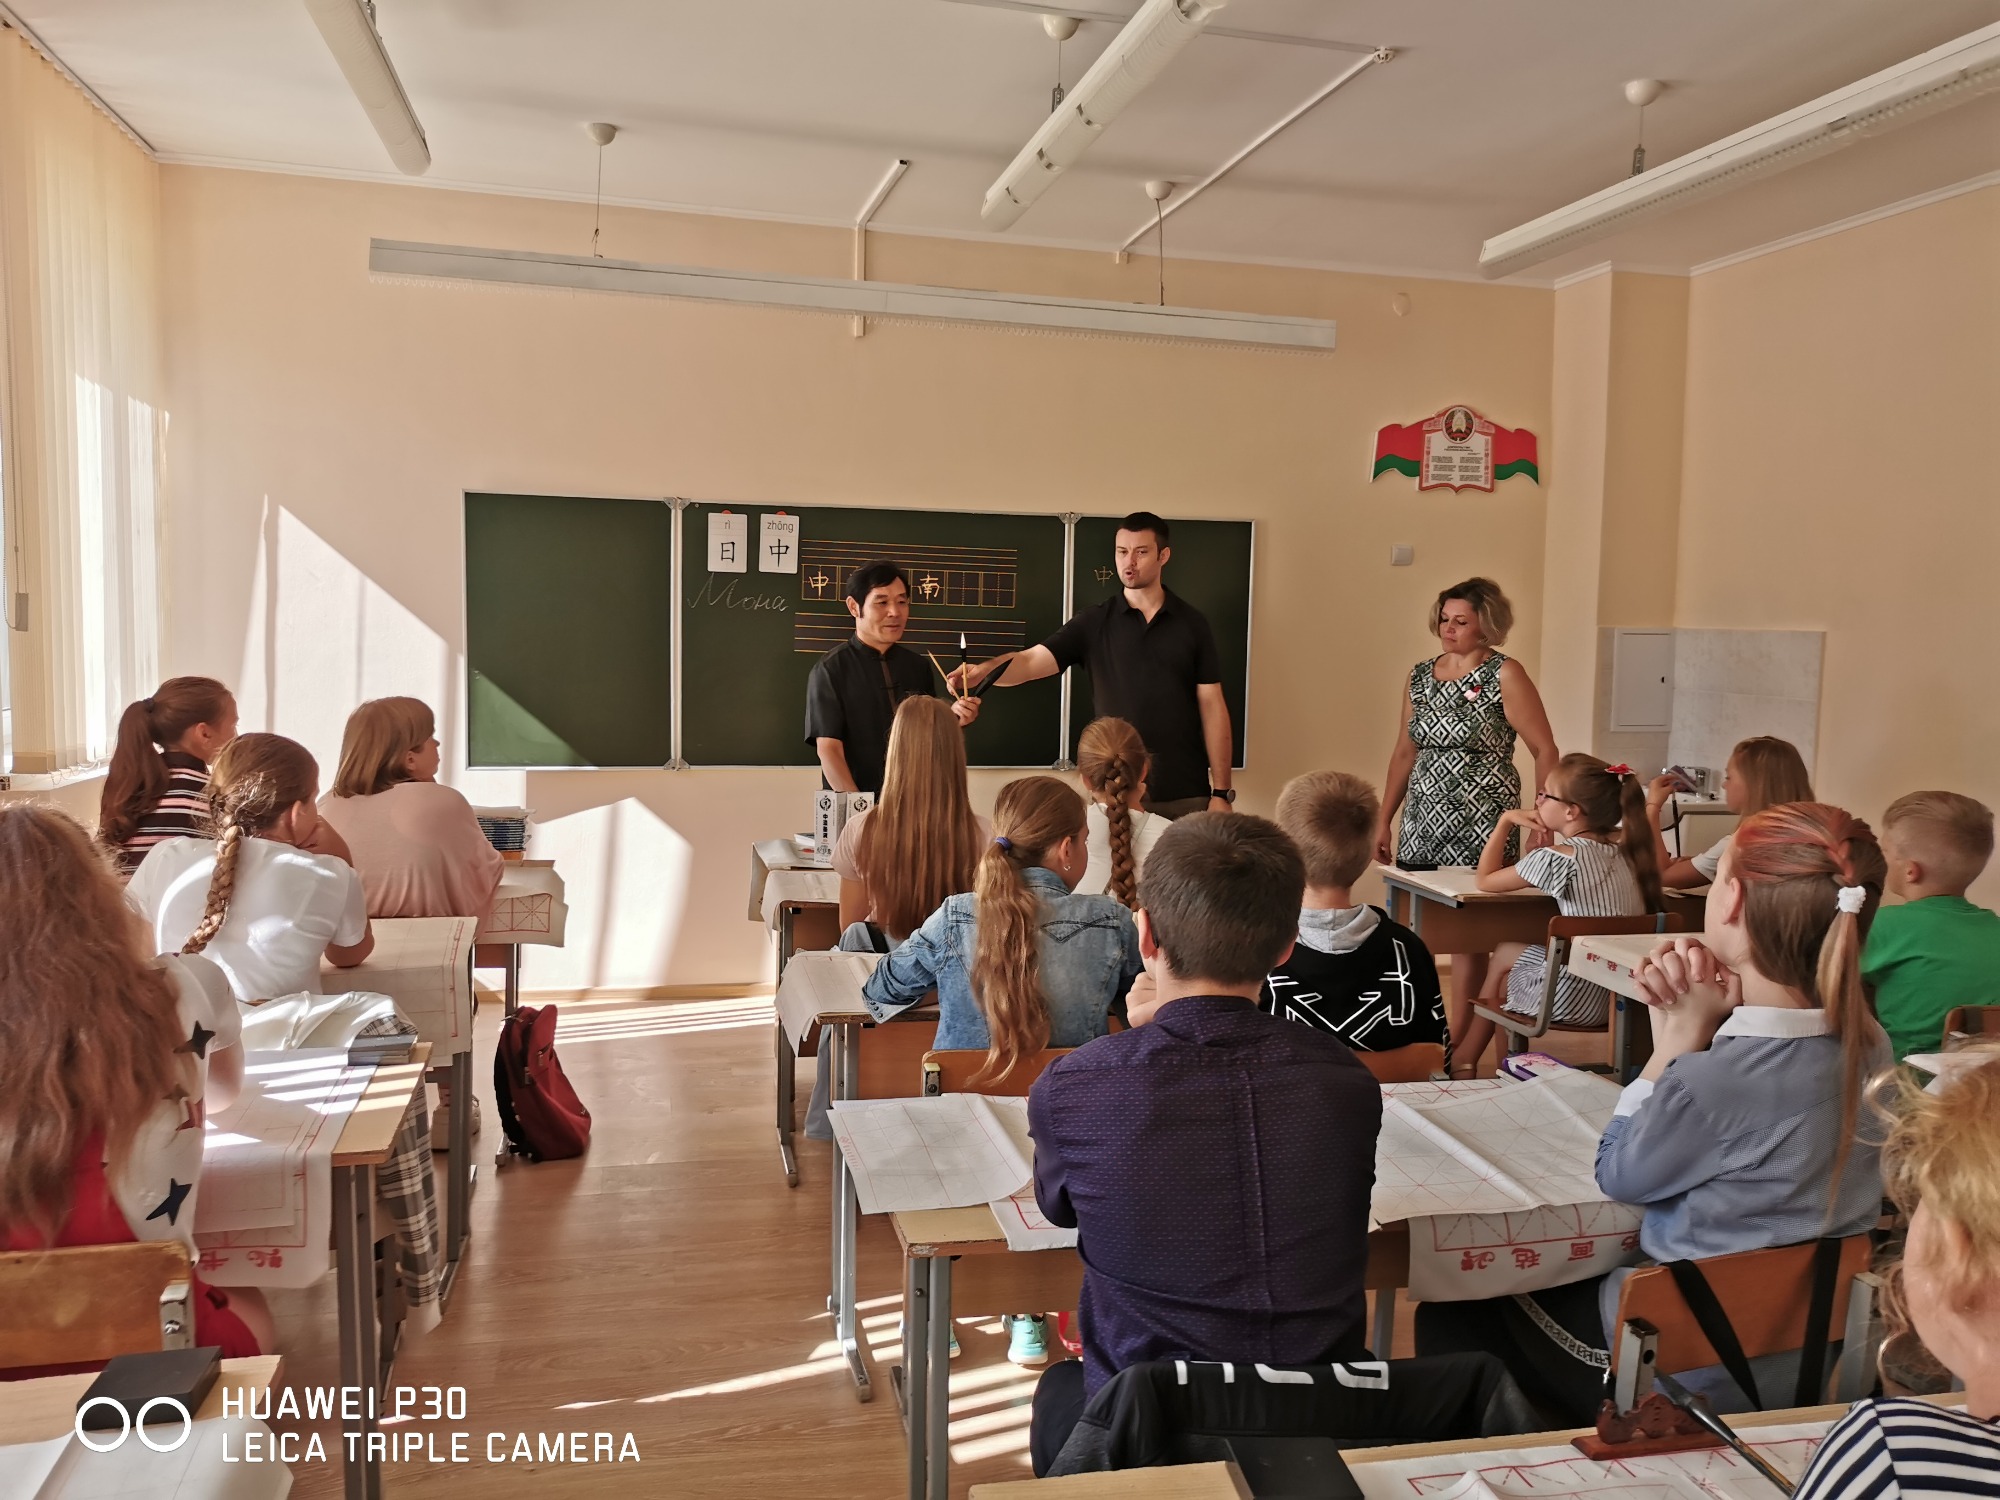 Organization of Chinese Language and Calligraphy cultural exchange activity at a secondary school in Belarus in summer 2019